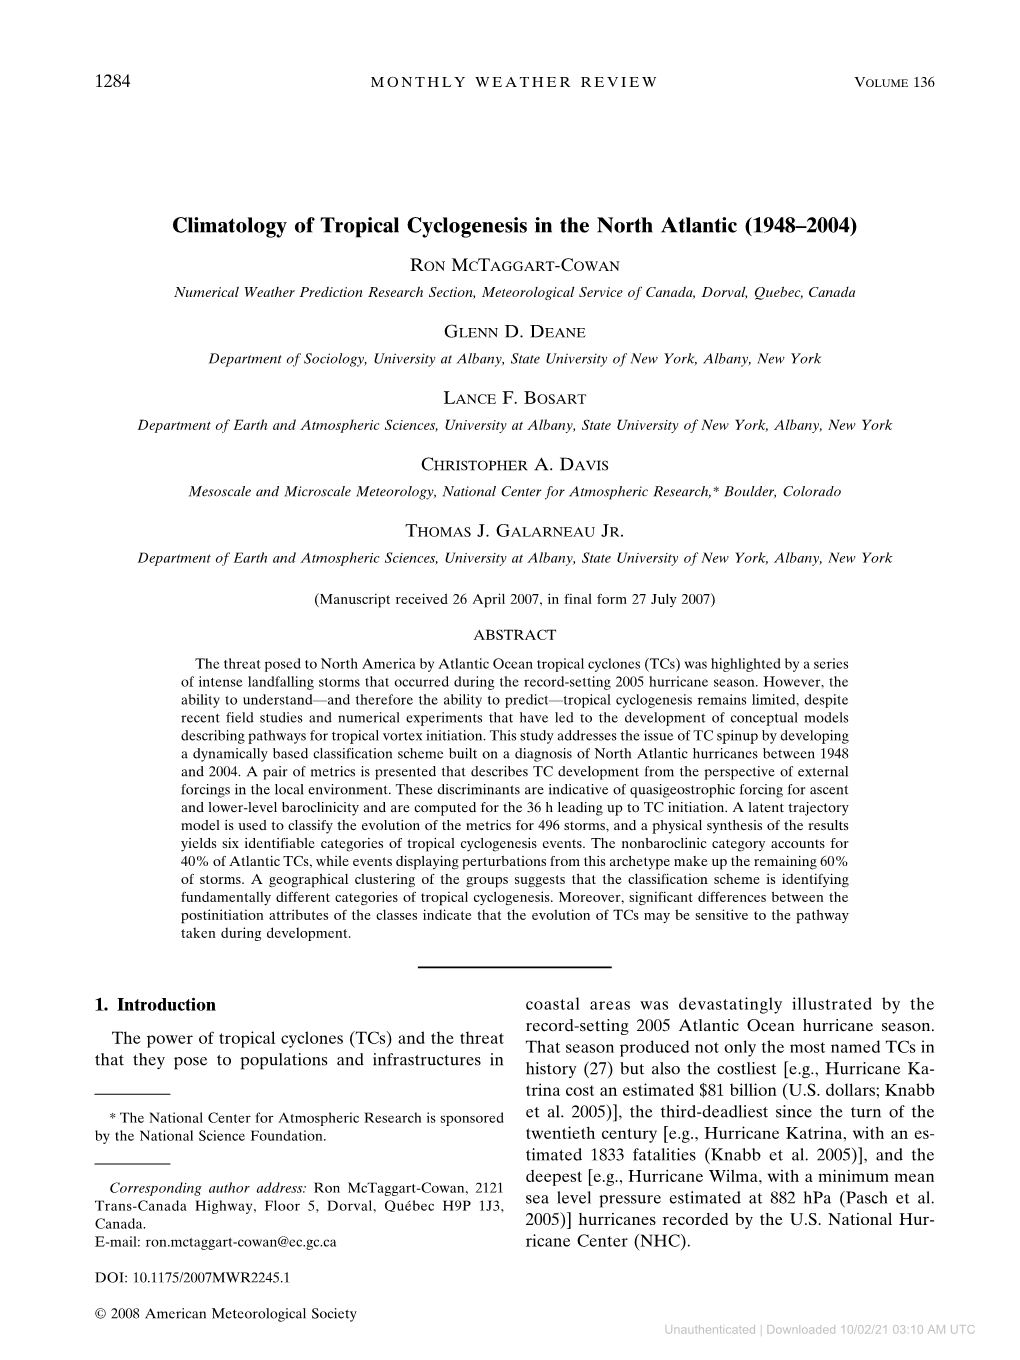 Climatology of Tropical Cyclogenesis in the North Atlantic (1948–2004)